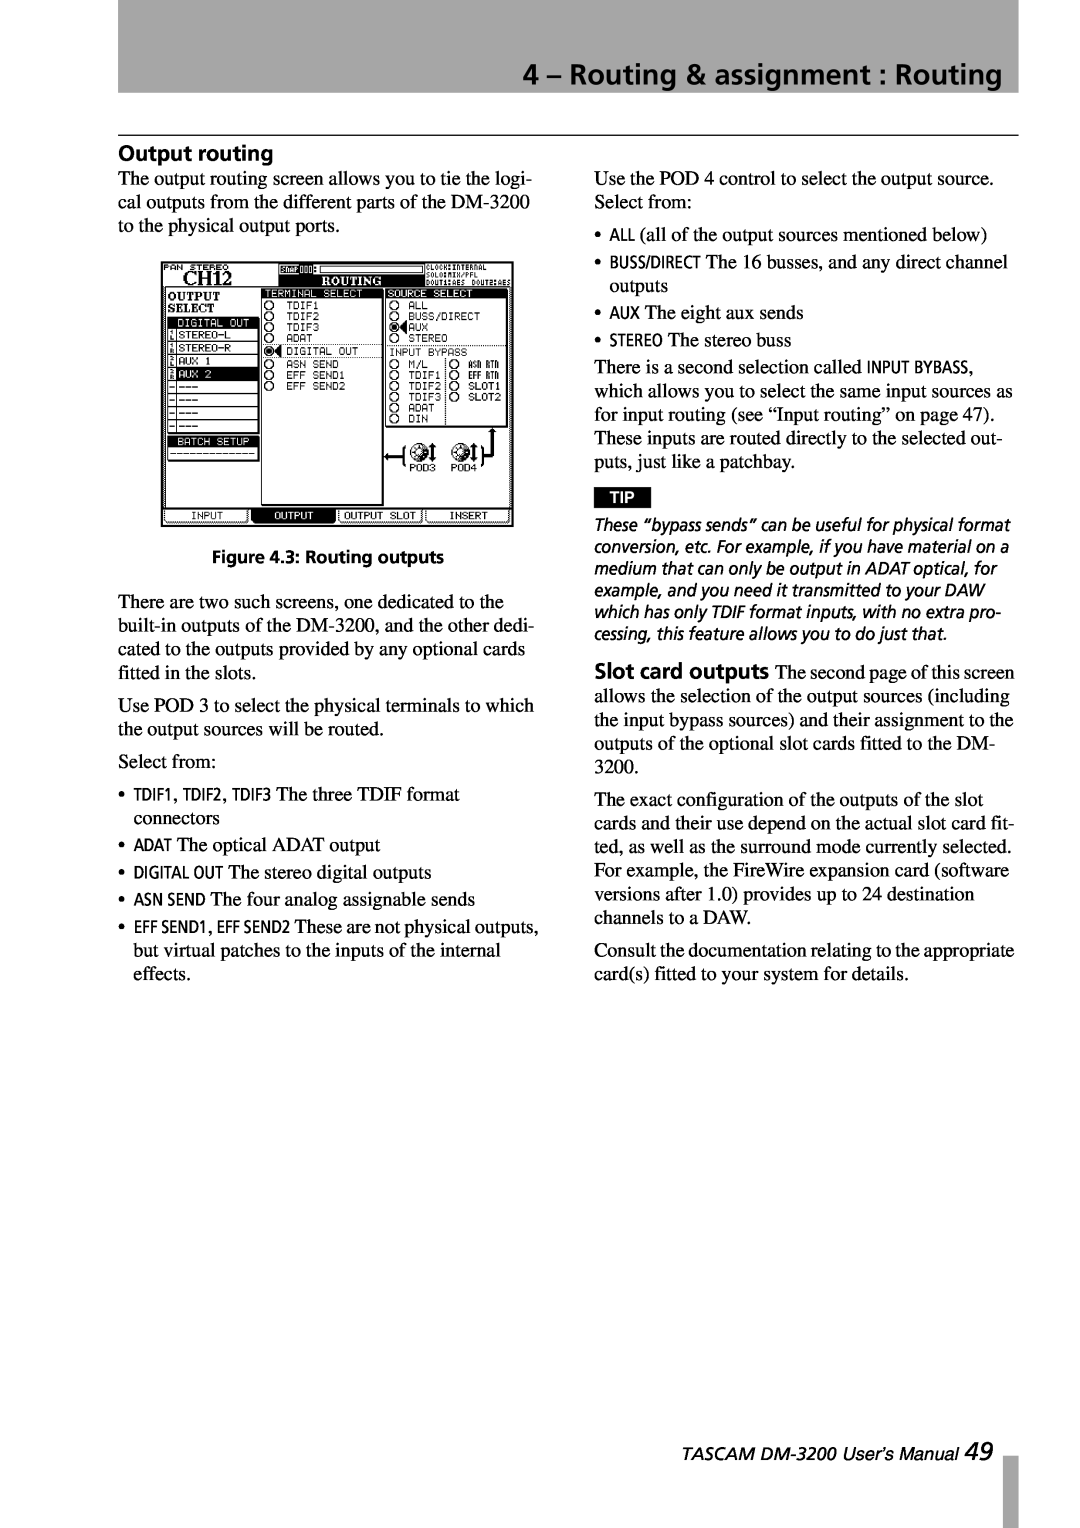 Tascam DM-3200 owner manual Output routing, 4 – Routing & assignment : Routing 